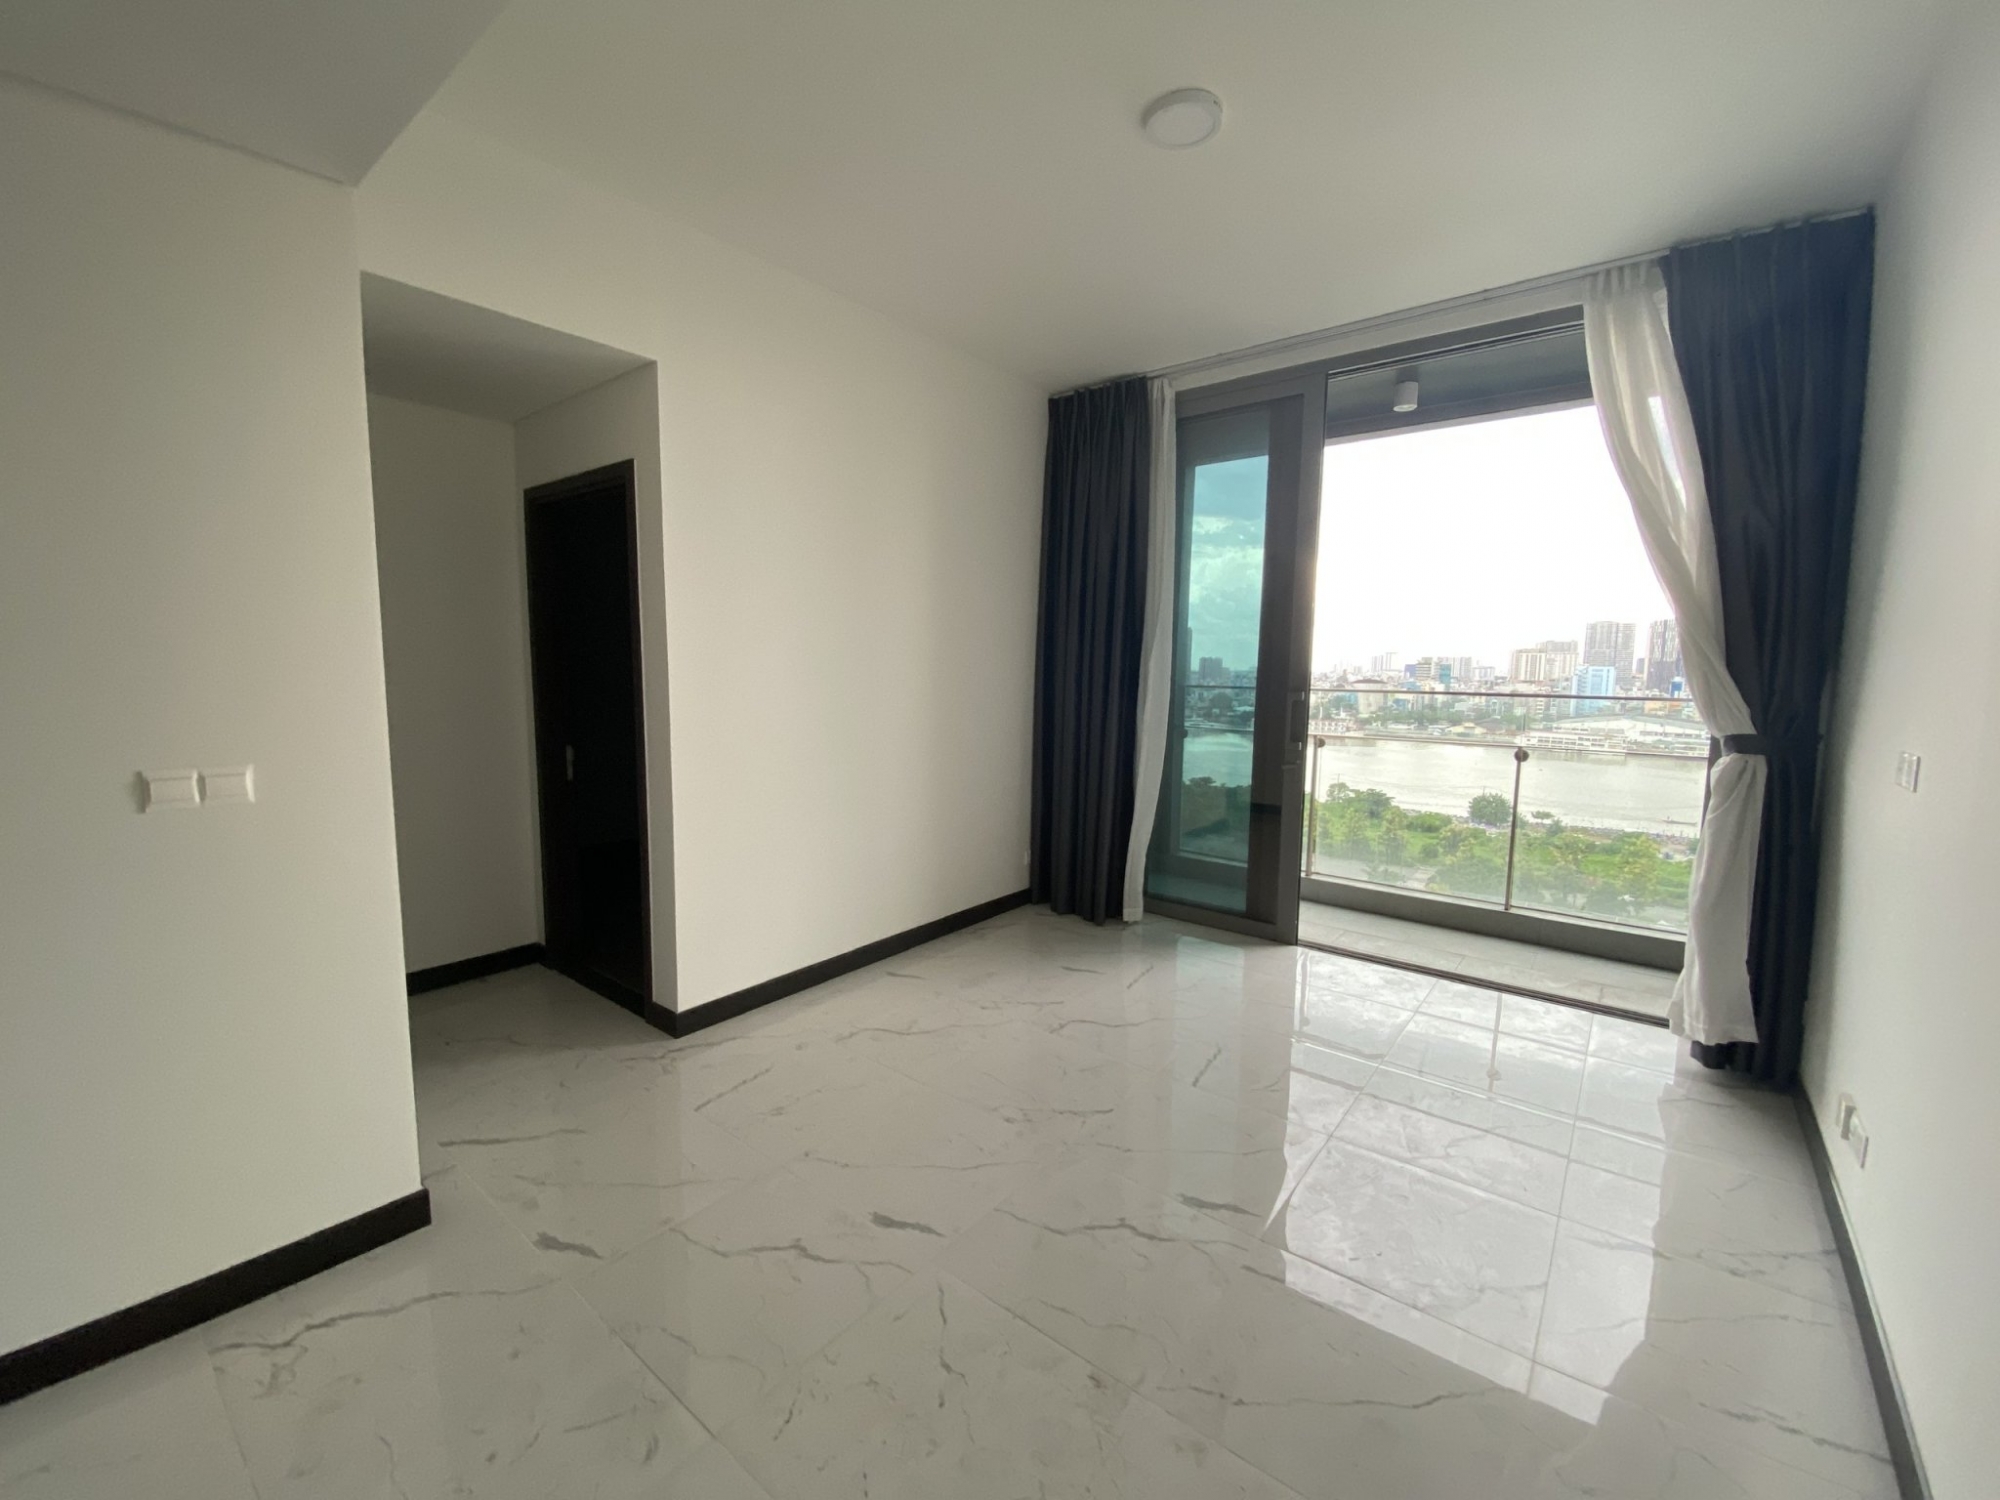 Luxury furnished apartment for rent with Saigon river view - 1 bedroom in Empire City